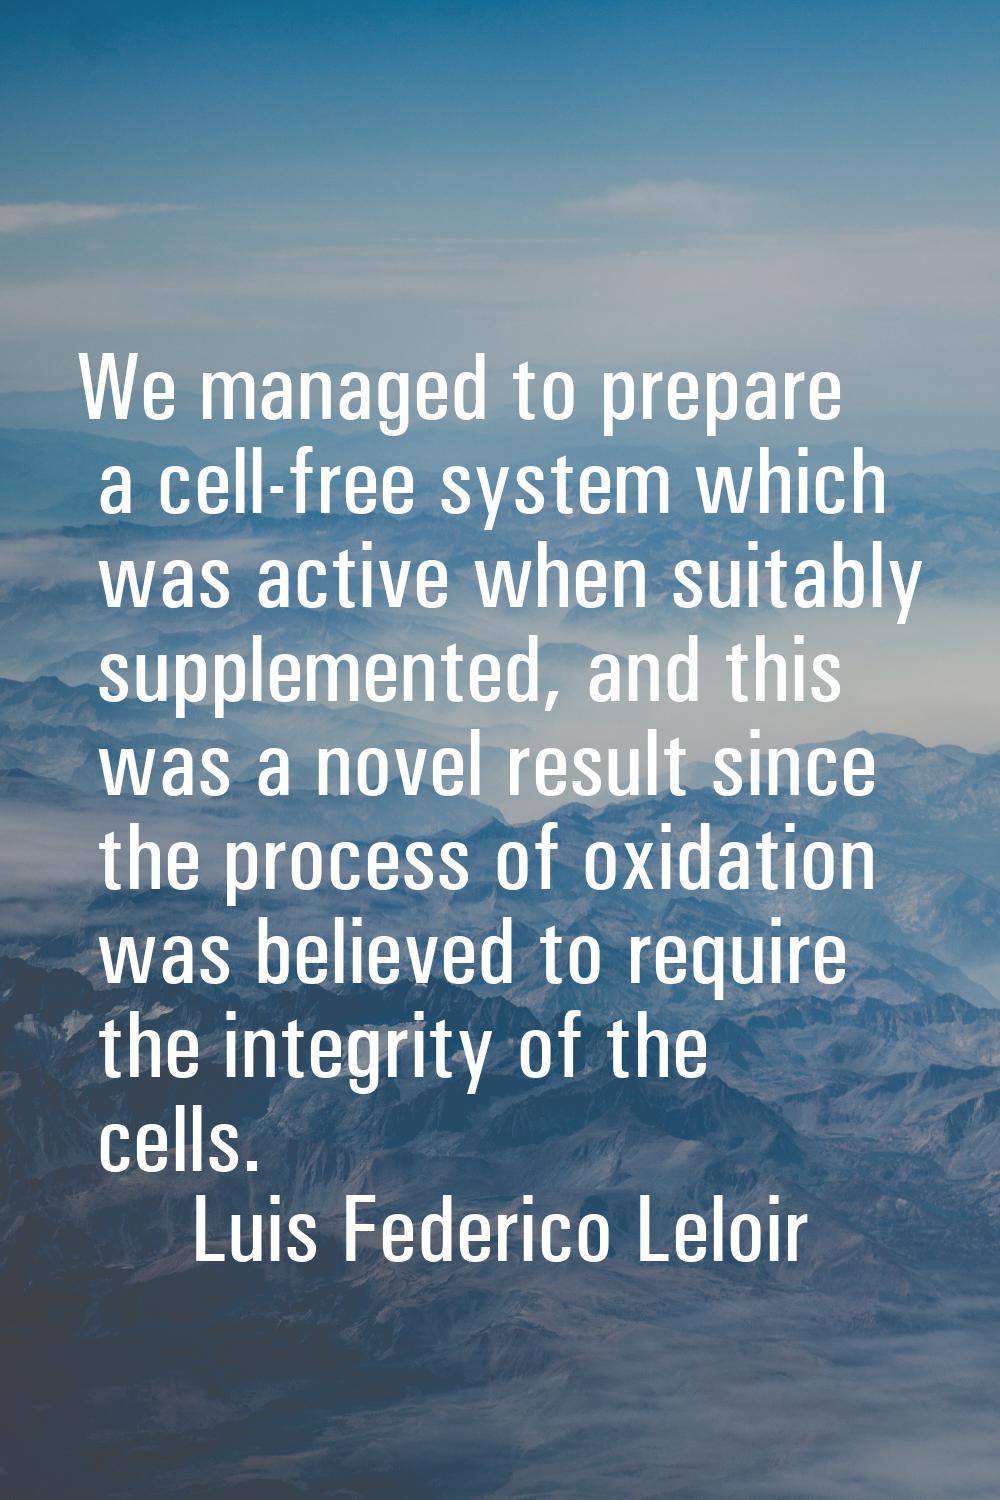 We managed to prepare a cell-free system which was active when suitably supplemented, and this was 